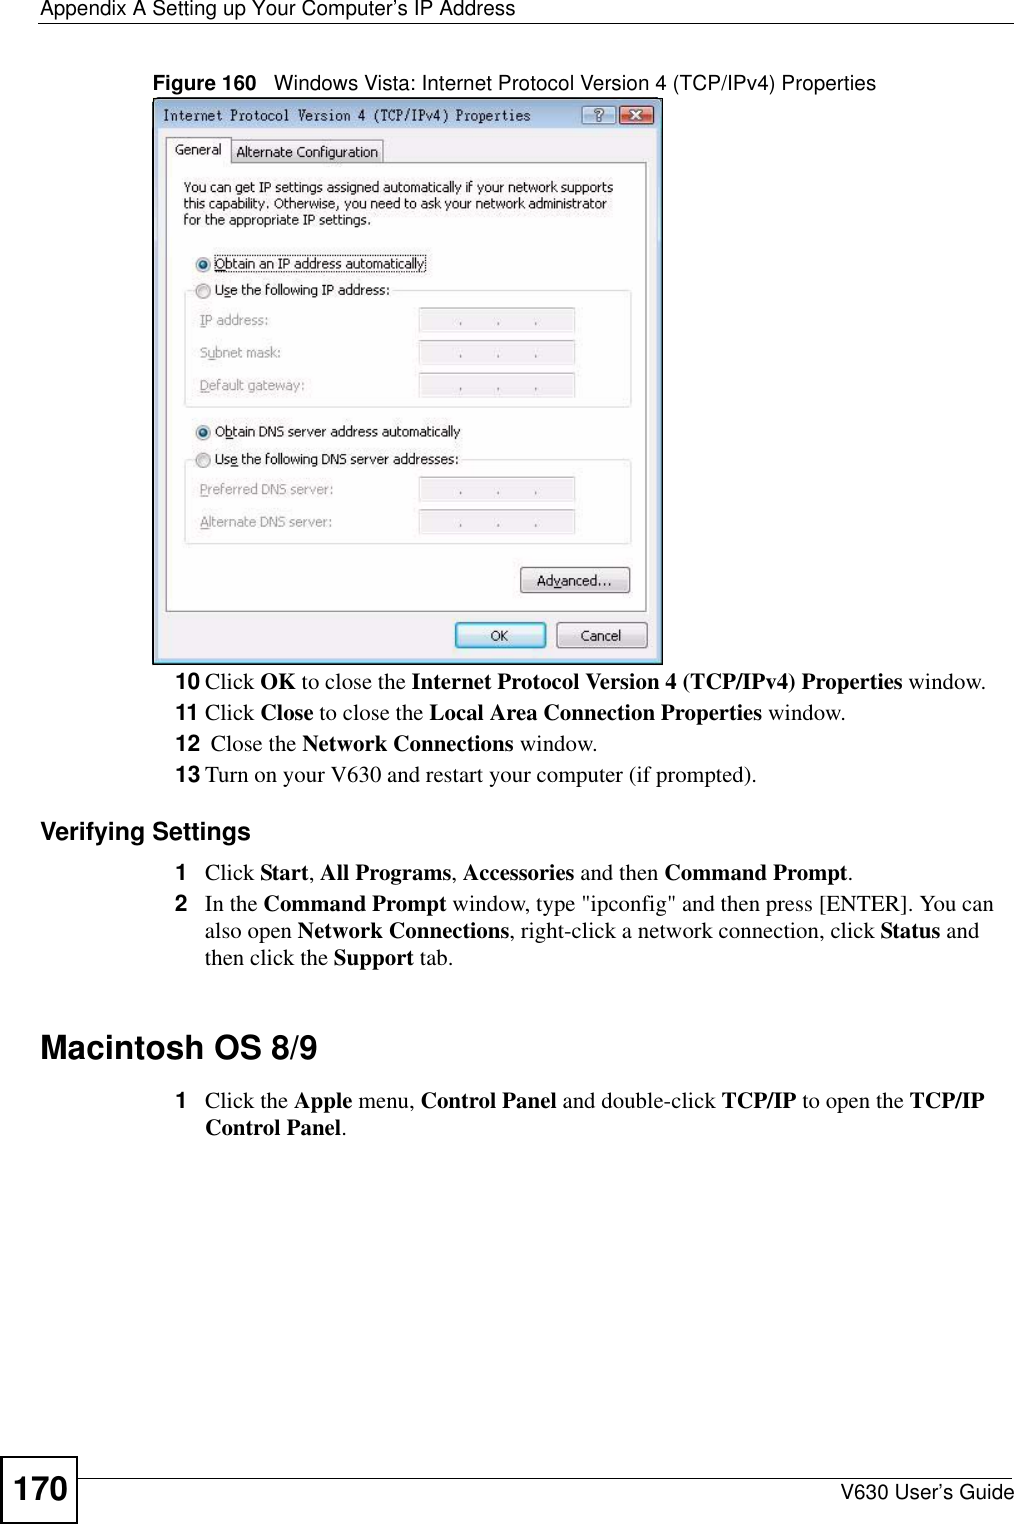 Appendix A Setting up Your Computer’s IP AddressV630 User’s Guide170Figure 160   Windows Vista: Internet Protocol Version 4 (TCP/IPv4) Properties10 Click OK to close the Internet Protocol Version 4 (TCP/IPv4) Properties window.11 Click Close to close the Local Area Connection Properties window.12  Close the Network Connections window.13 Turn on your V630 and restart your computer (if prompted).Verifying Settings1Click Start, All Programs, Accessories and then Command Prompt.2In the Command Prompt window, type &quot;ipconfig&quot; and then press [ENTER]. You can also open Network Connections, right-click a network connection, click Status and then click the Support tab.Macintosh OS 8/9 1Click the Apple menu, Control Panel and double-click TCP/IP to open the TCP/IP Control Panel.